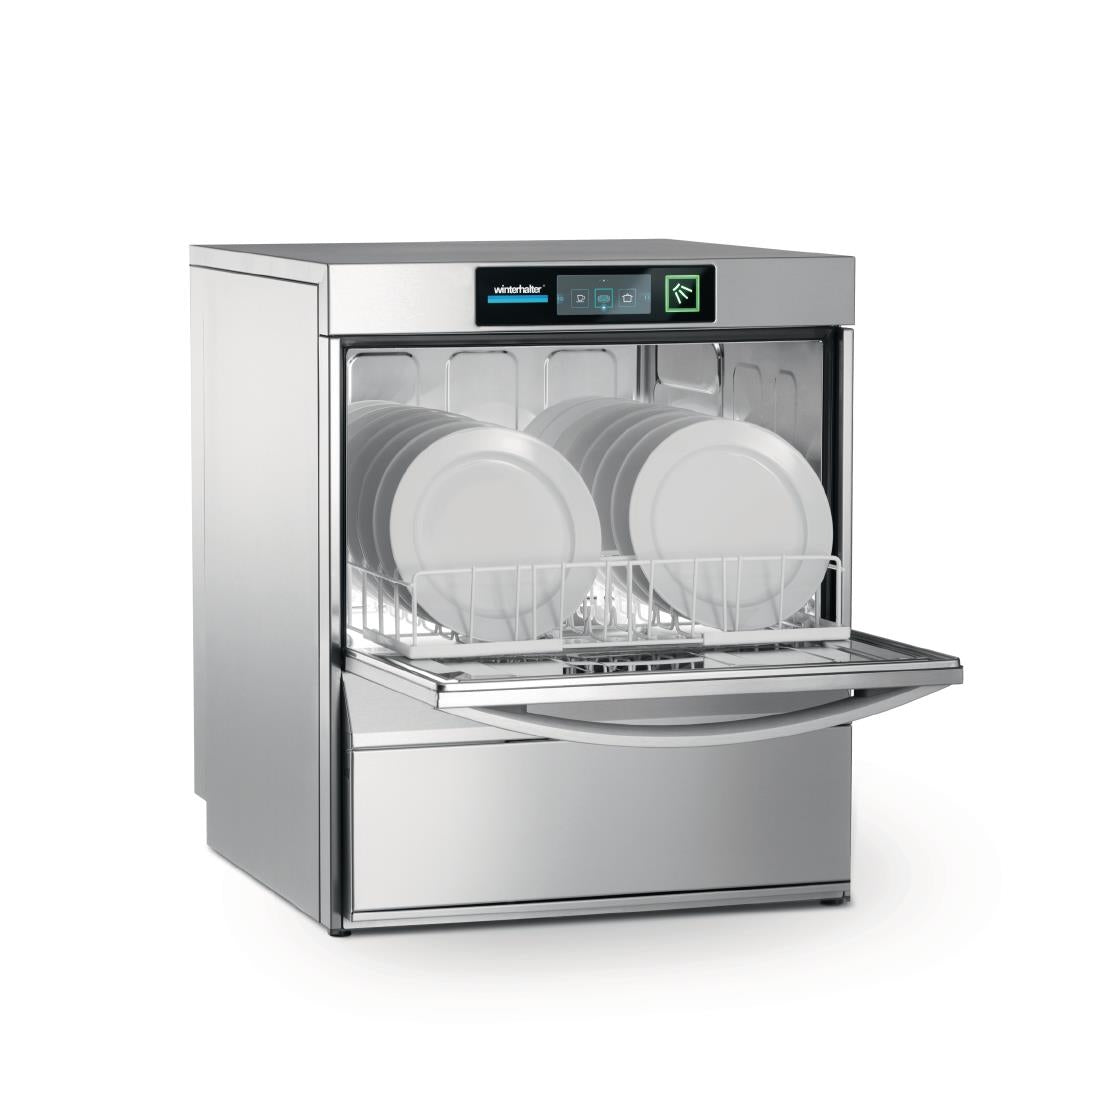 FD308 Winterhalter Undercounter Thermal Disinfection Dishwasher UC-M JD Catering Equipment Solutions Ltd